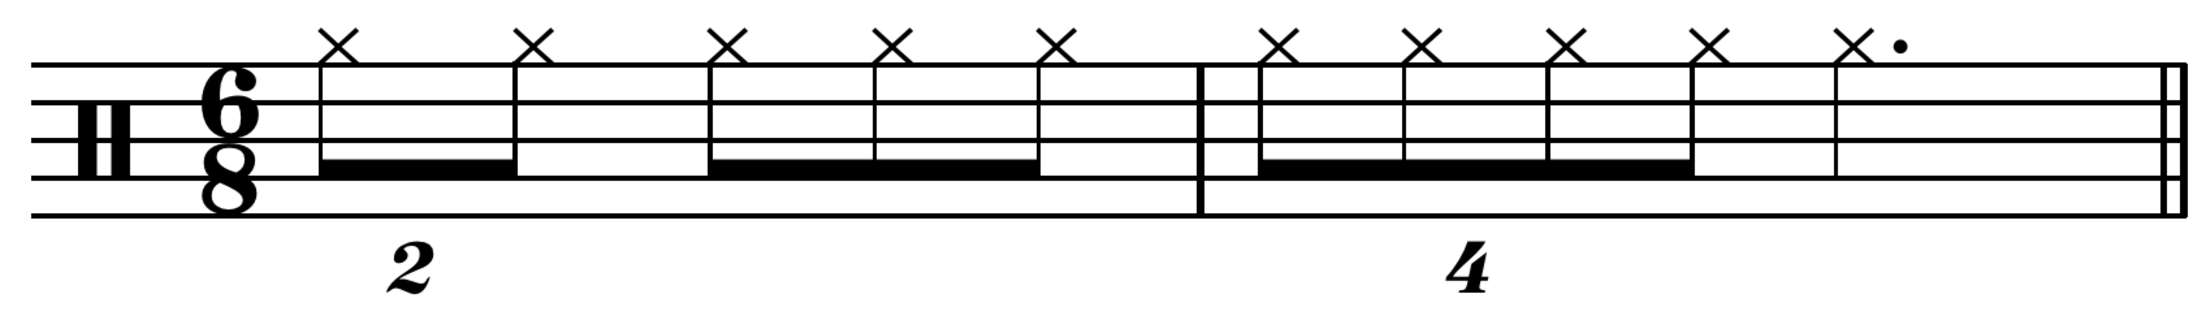 How many quarter notes equal one whole dotted note